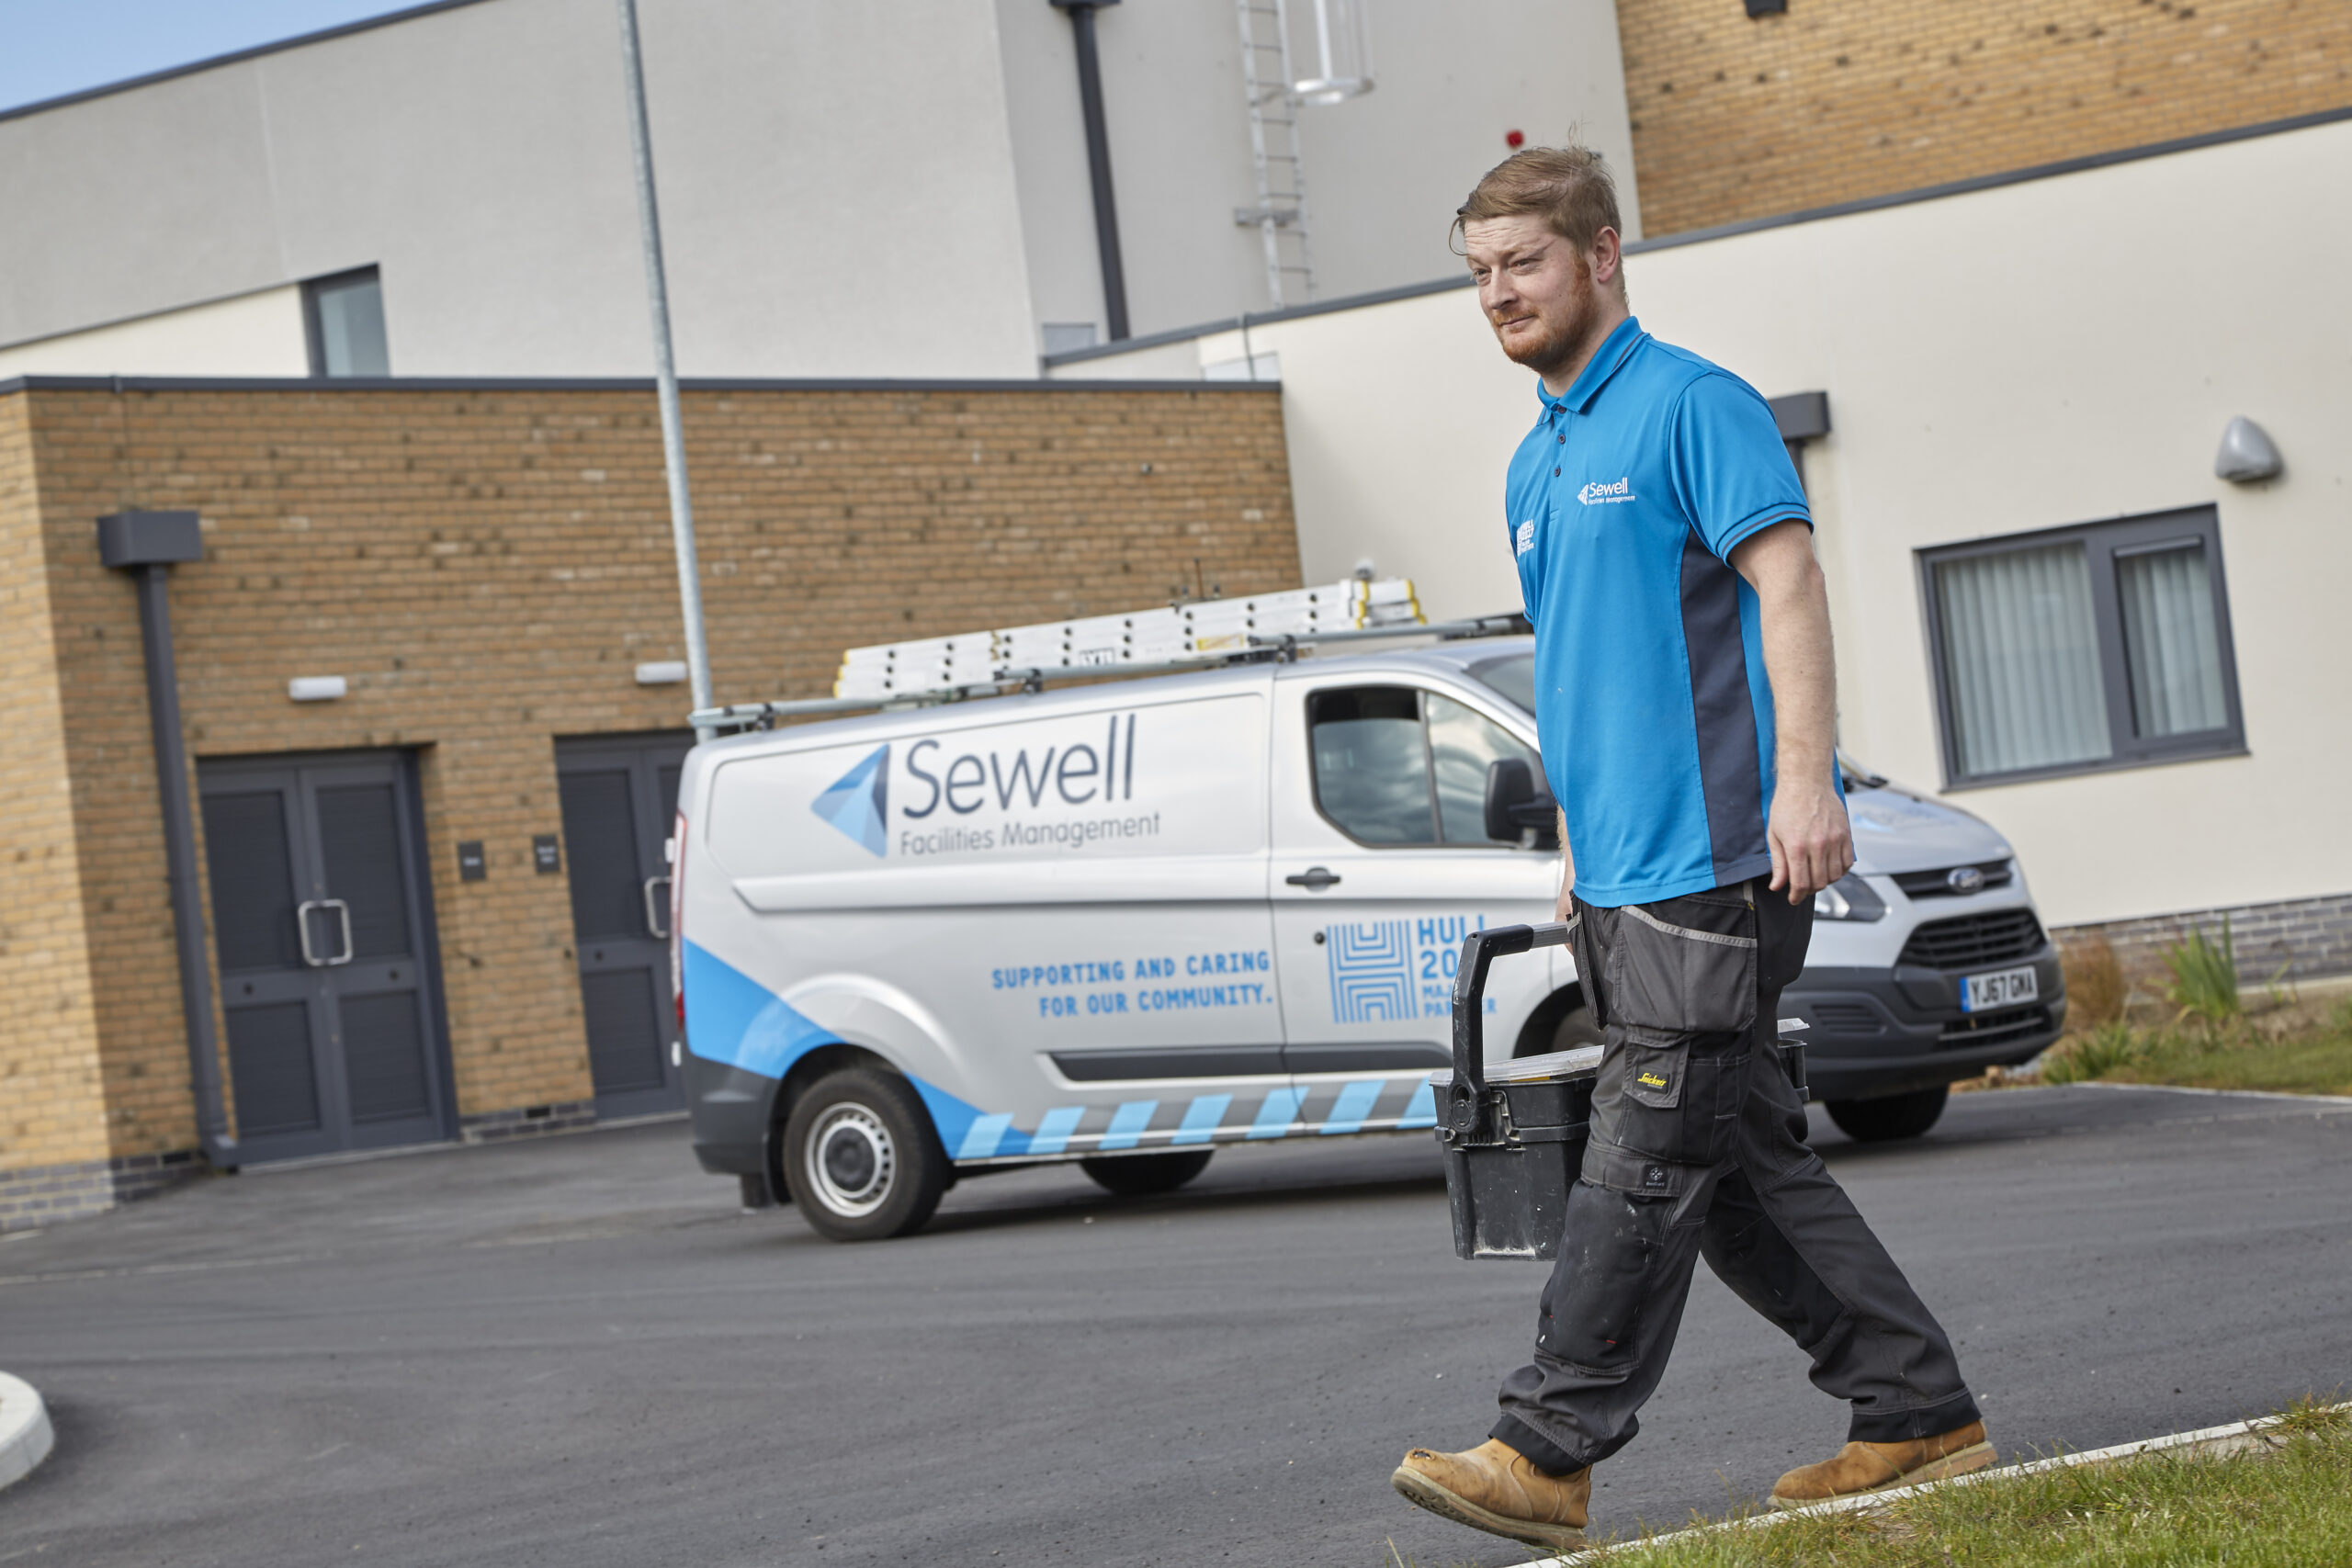 A Sewell FM technician with a toolbox walks from a van into a building